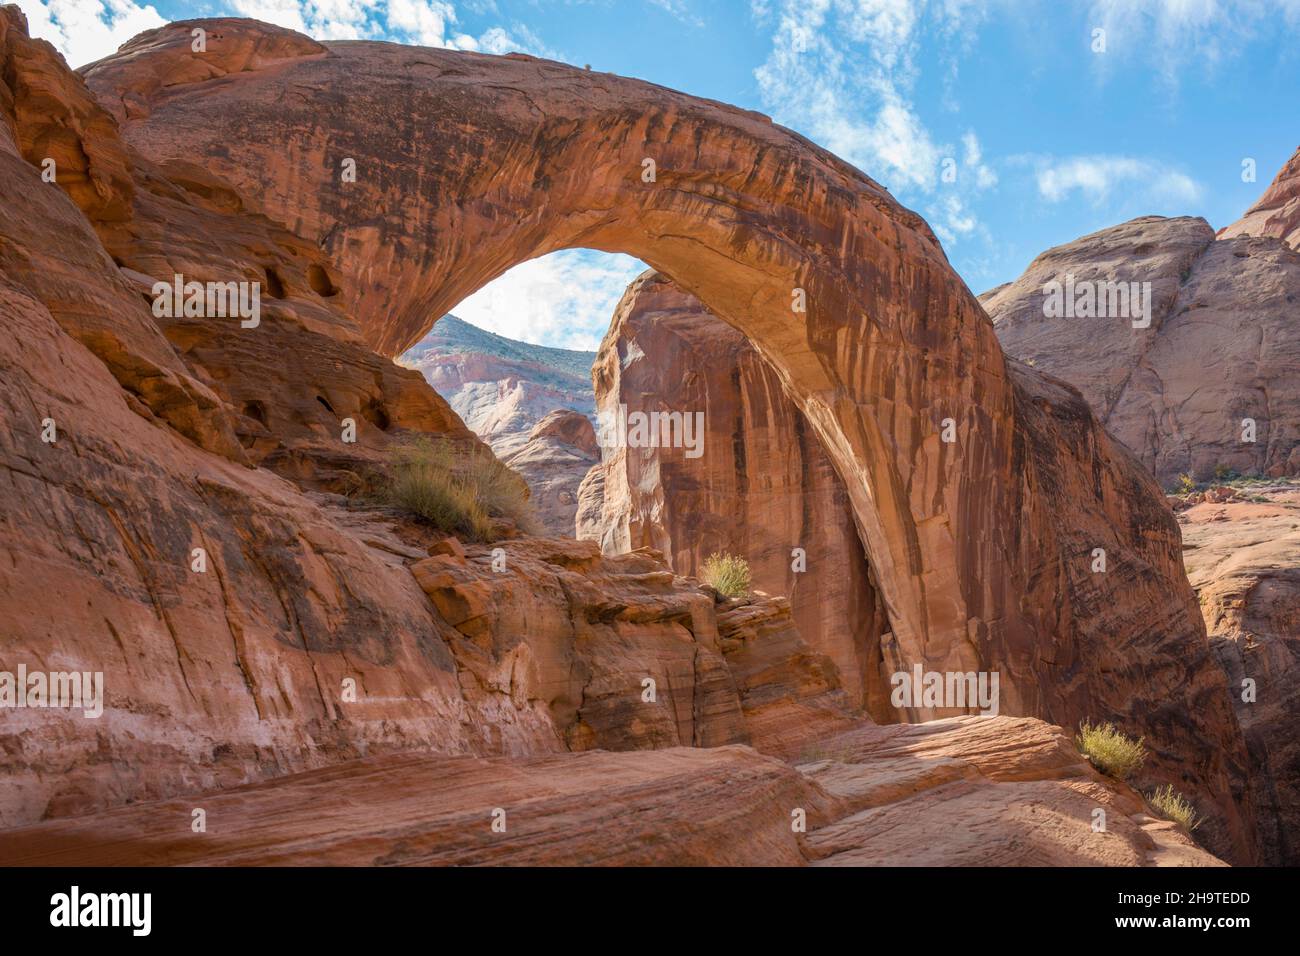 Glen Canyon National Recreation Area, Utah, USA. Low angle view from rocky outcrop of the huge sandstone arch of Rainbow Bridge National Monument. Stock Photo